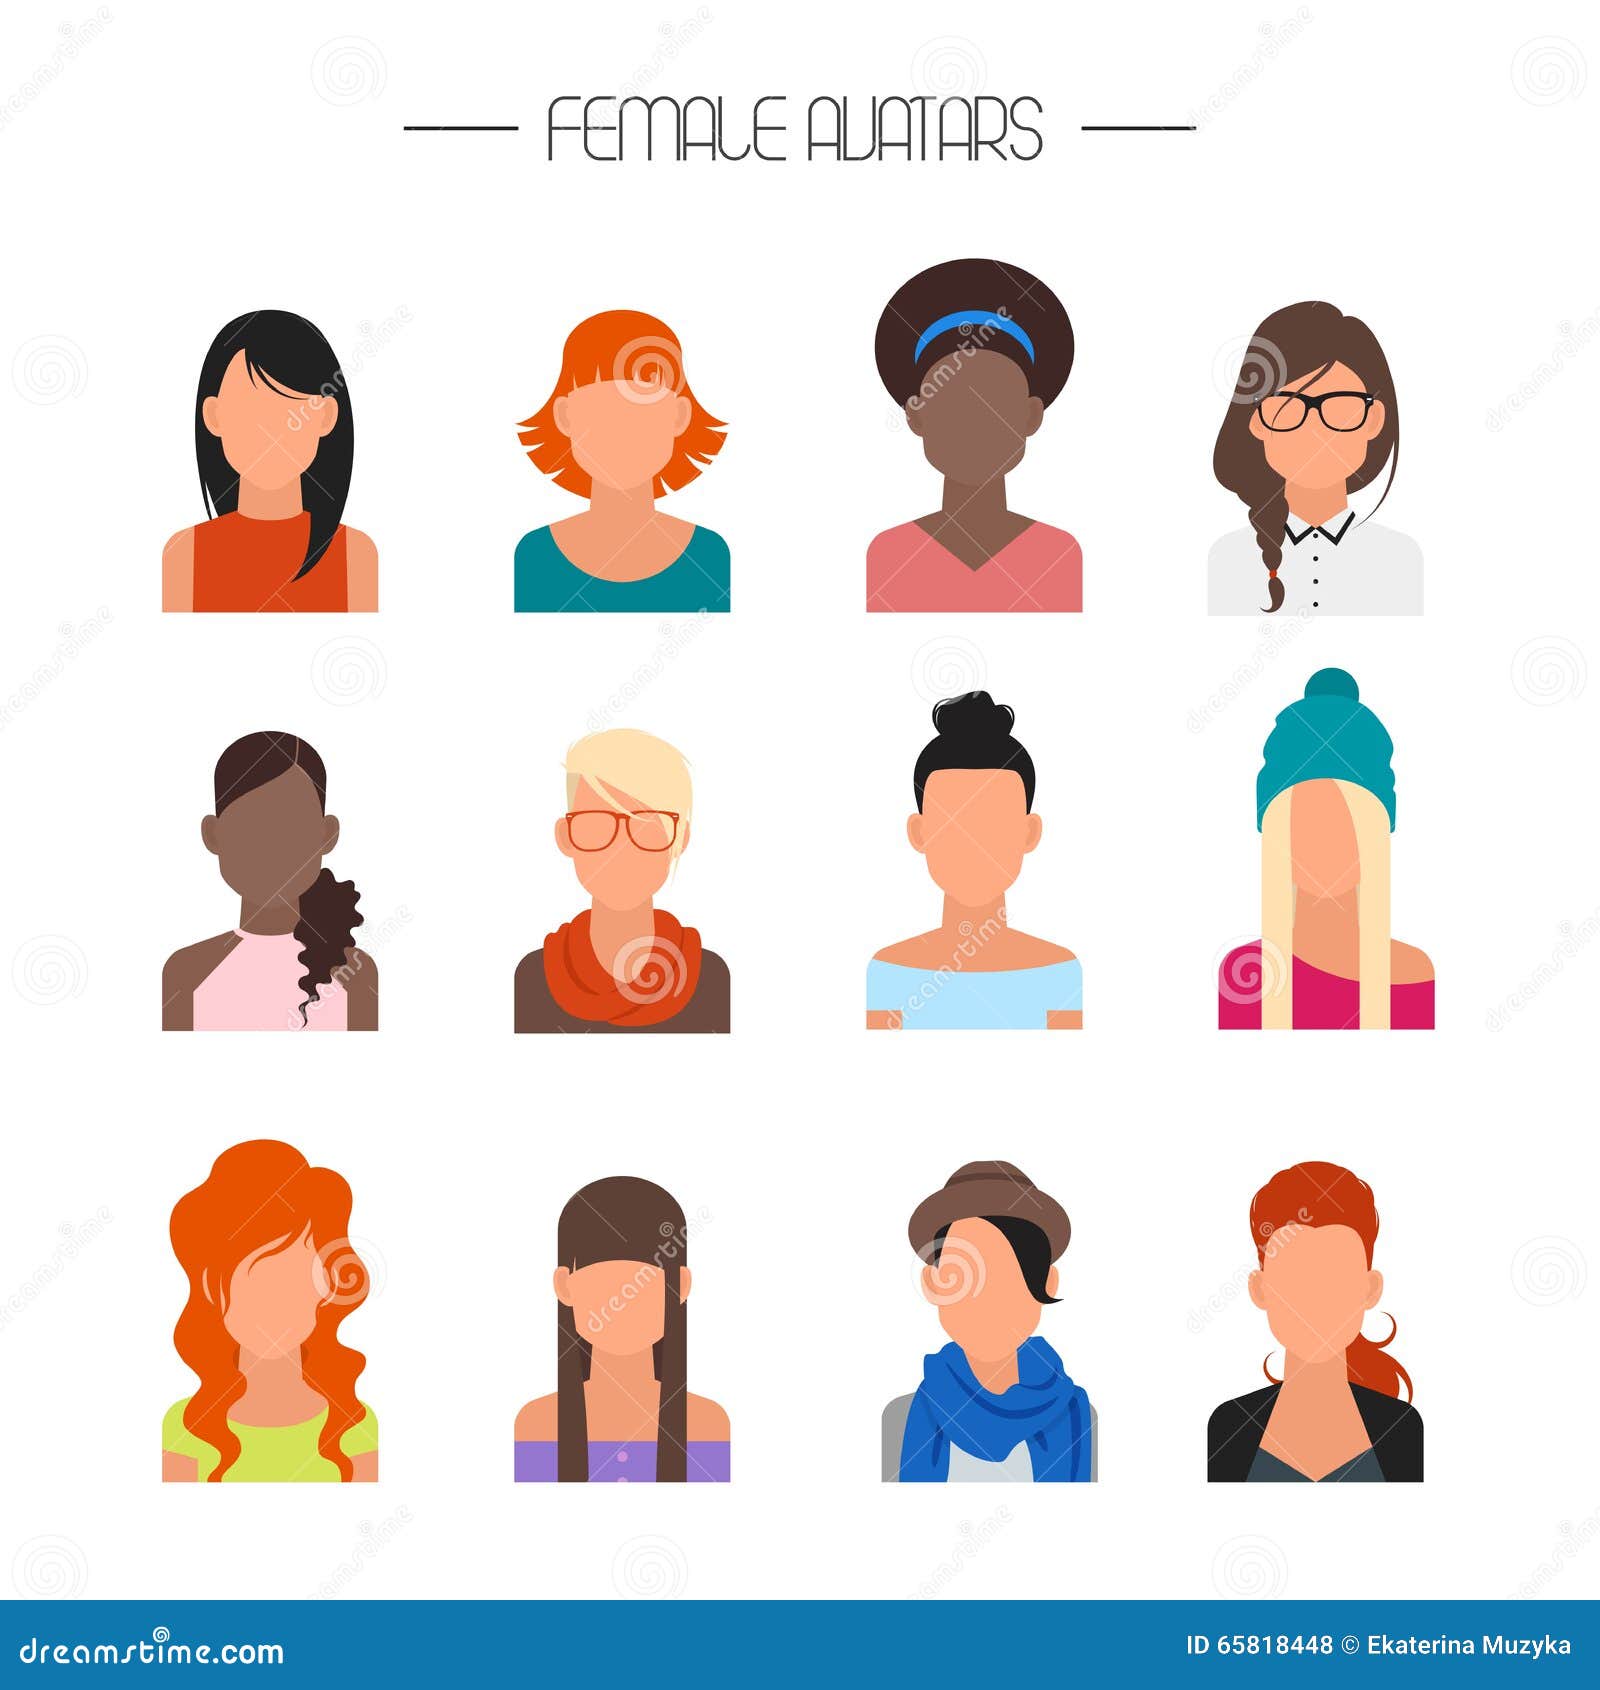 Female Avatar Icons Vector Set. People Characters In Flat 